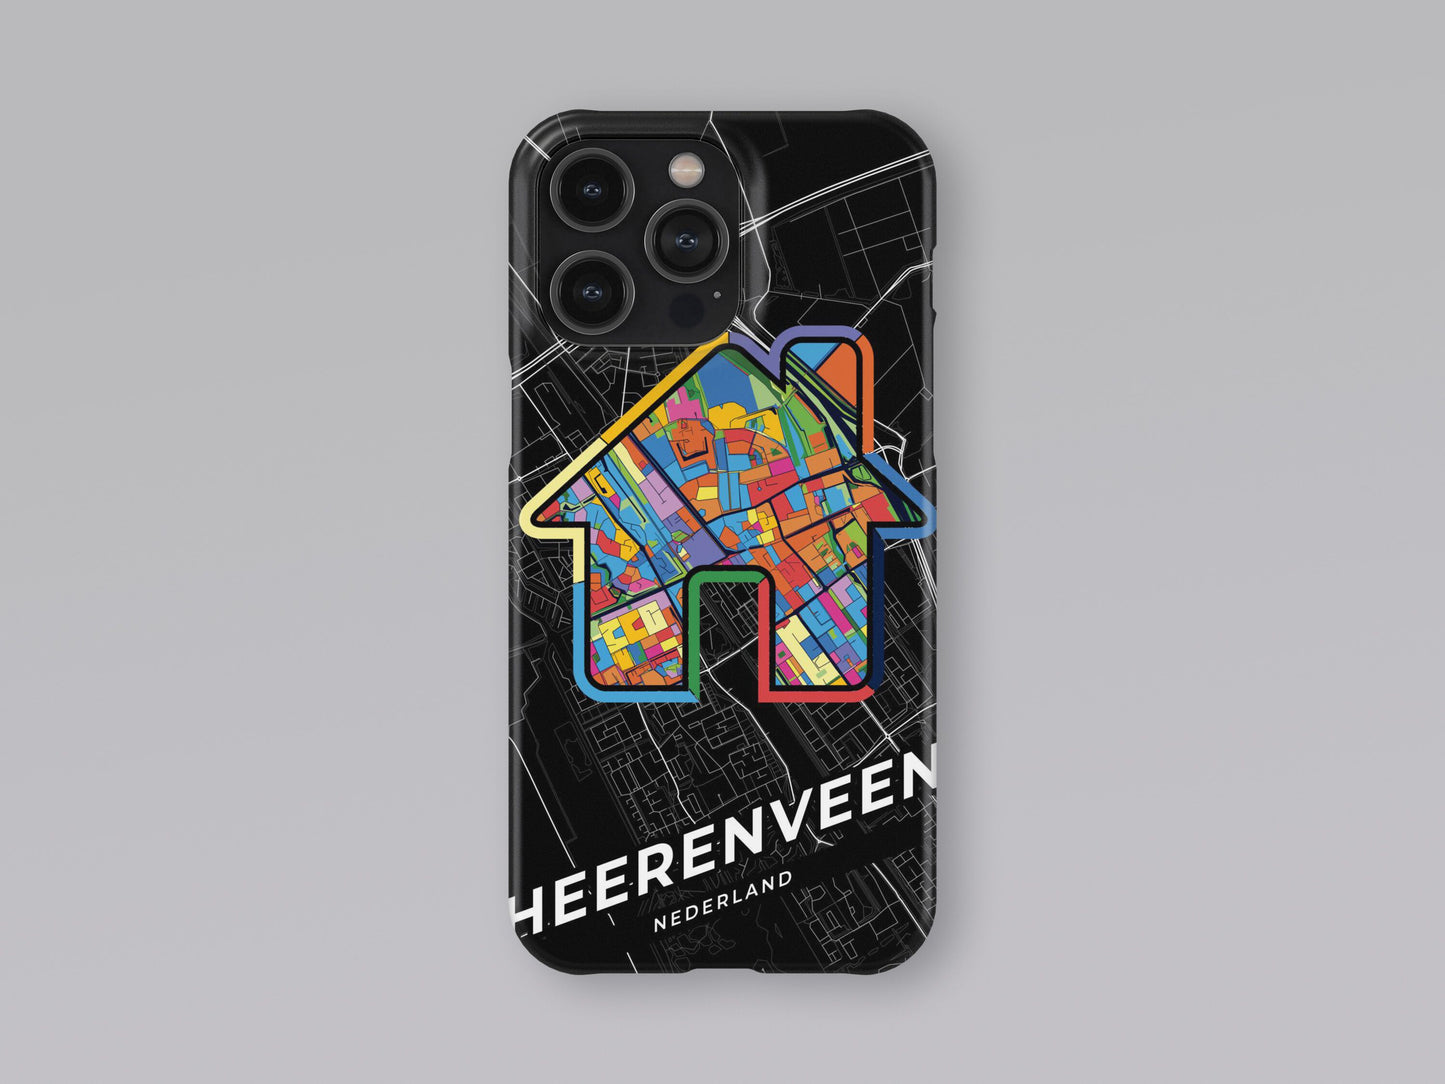 Heerenveen Netherlands slim phone case with colorful icon. Birthday, wedding or housewarming gift. Couple match cases. 3